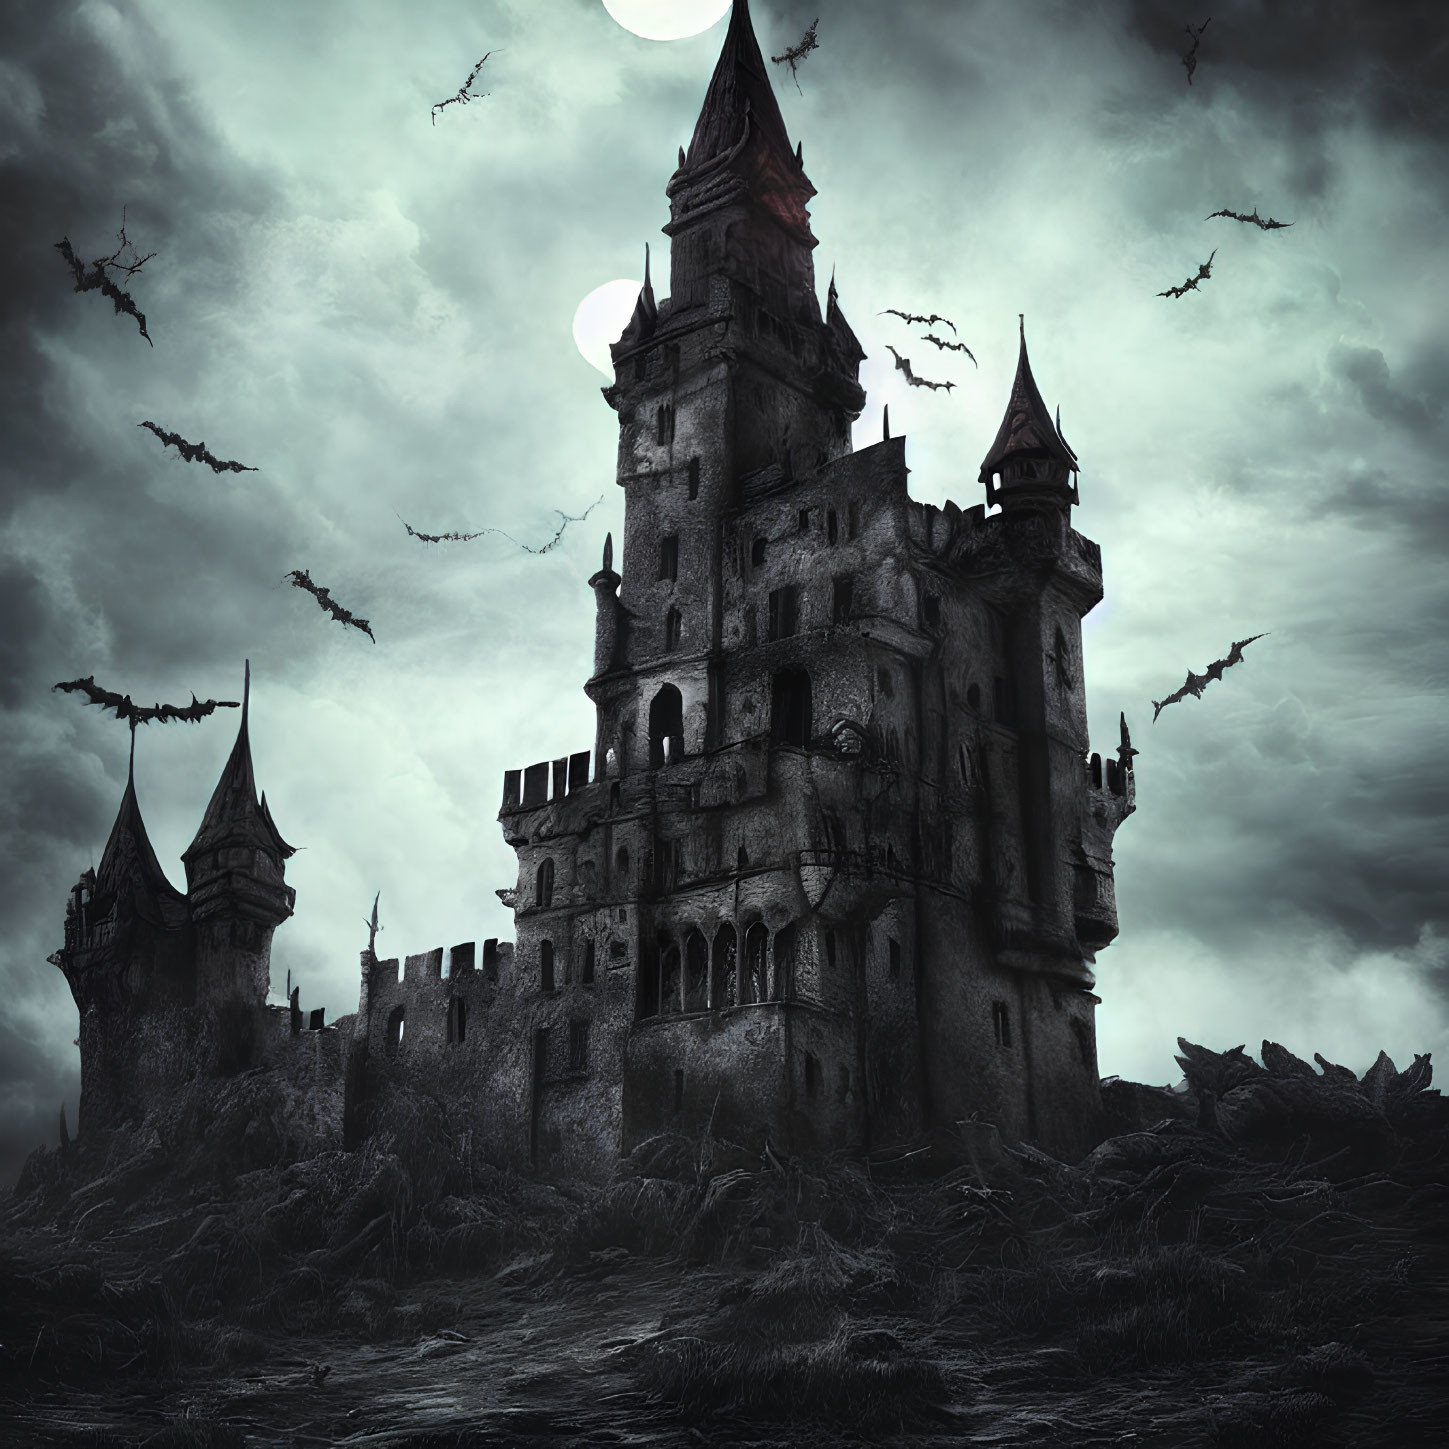 Gothic castle under gloomy sky with full moon and flying bats